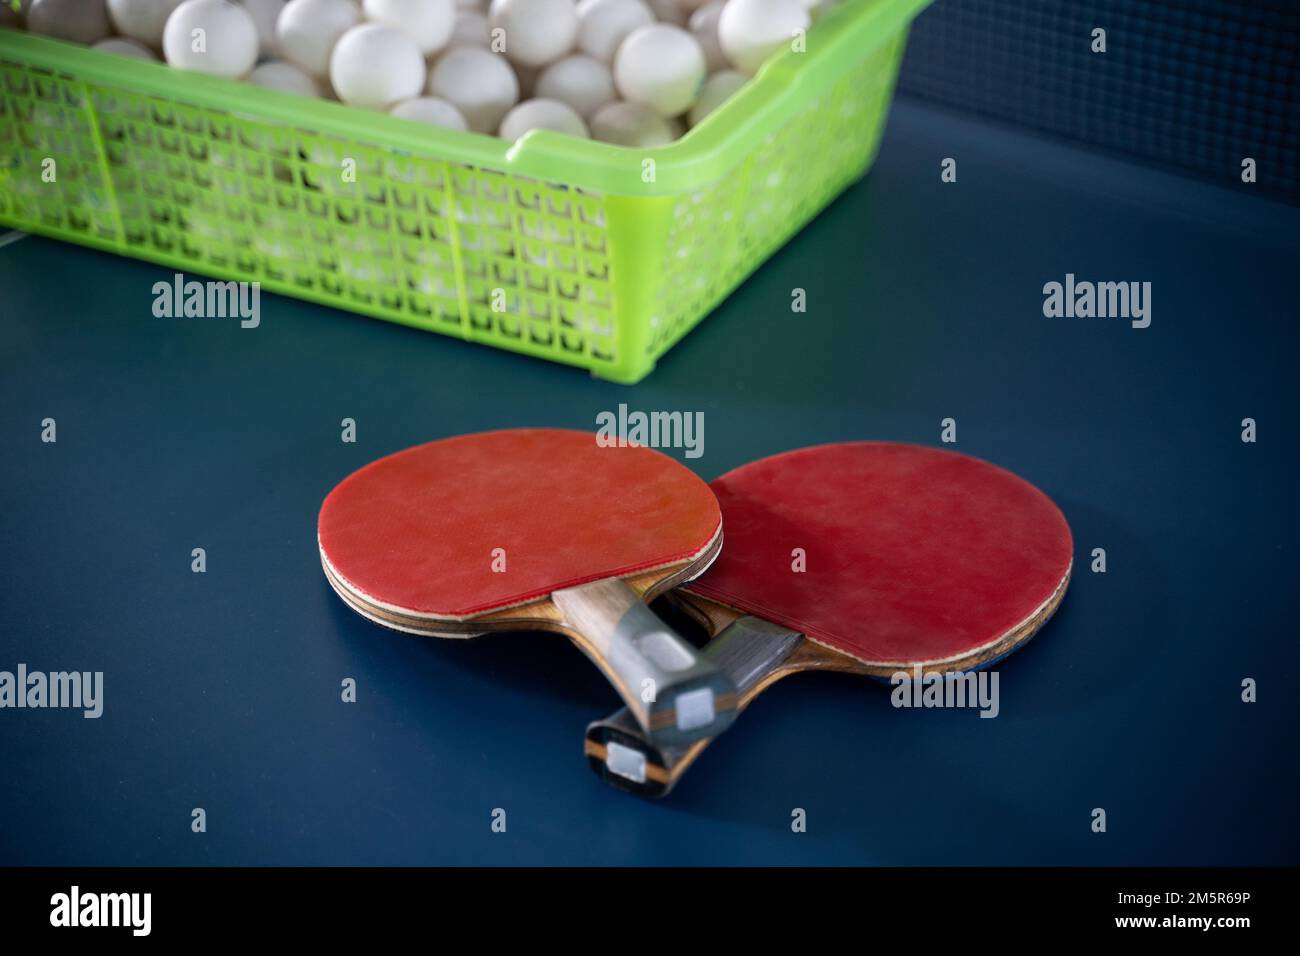 Two paddles with balls on a ping pong table Stock Photo